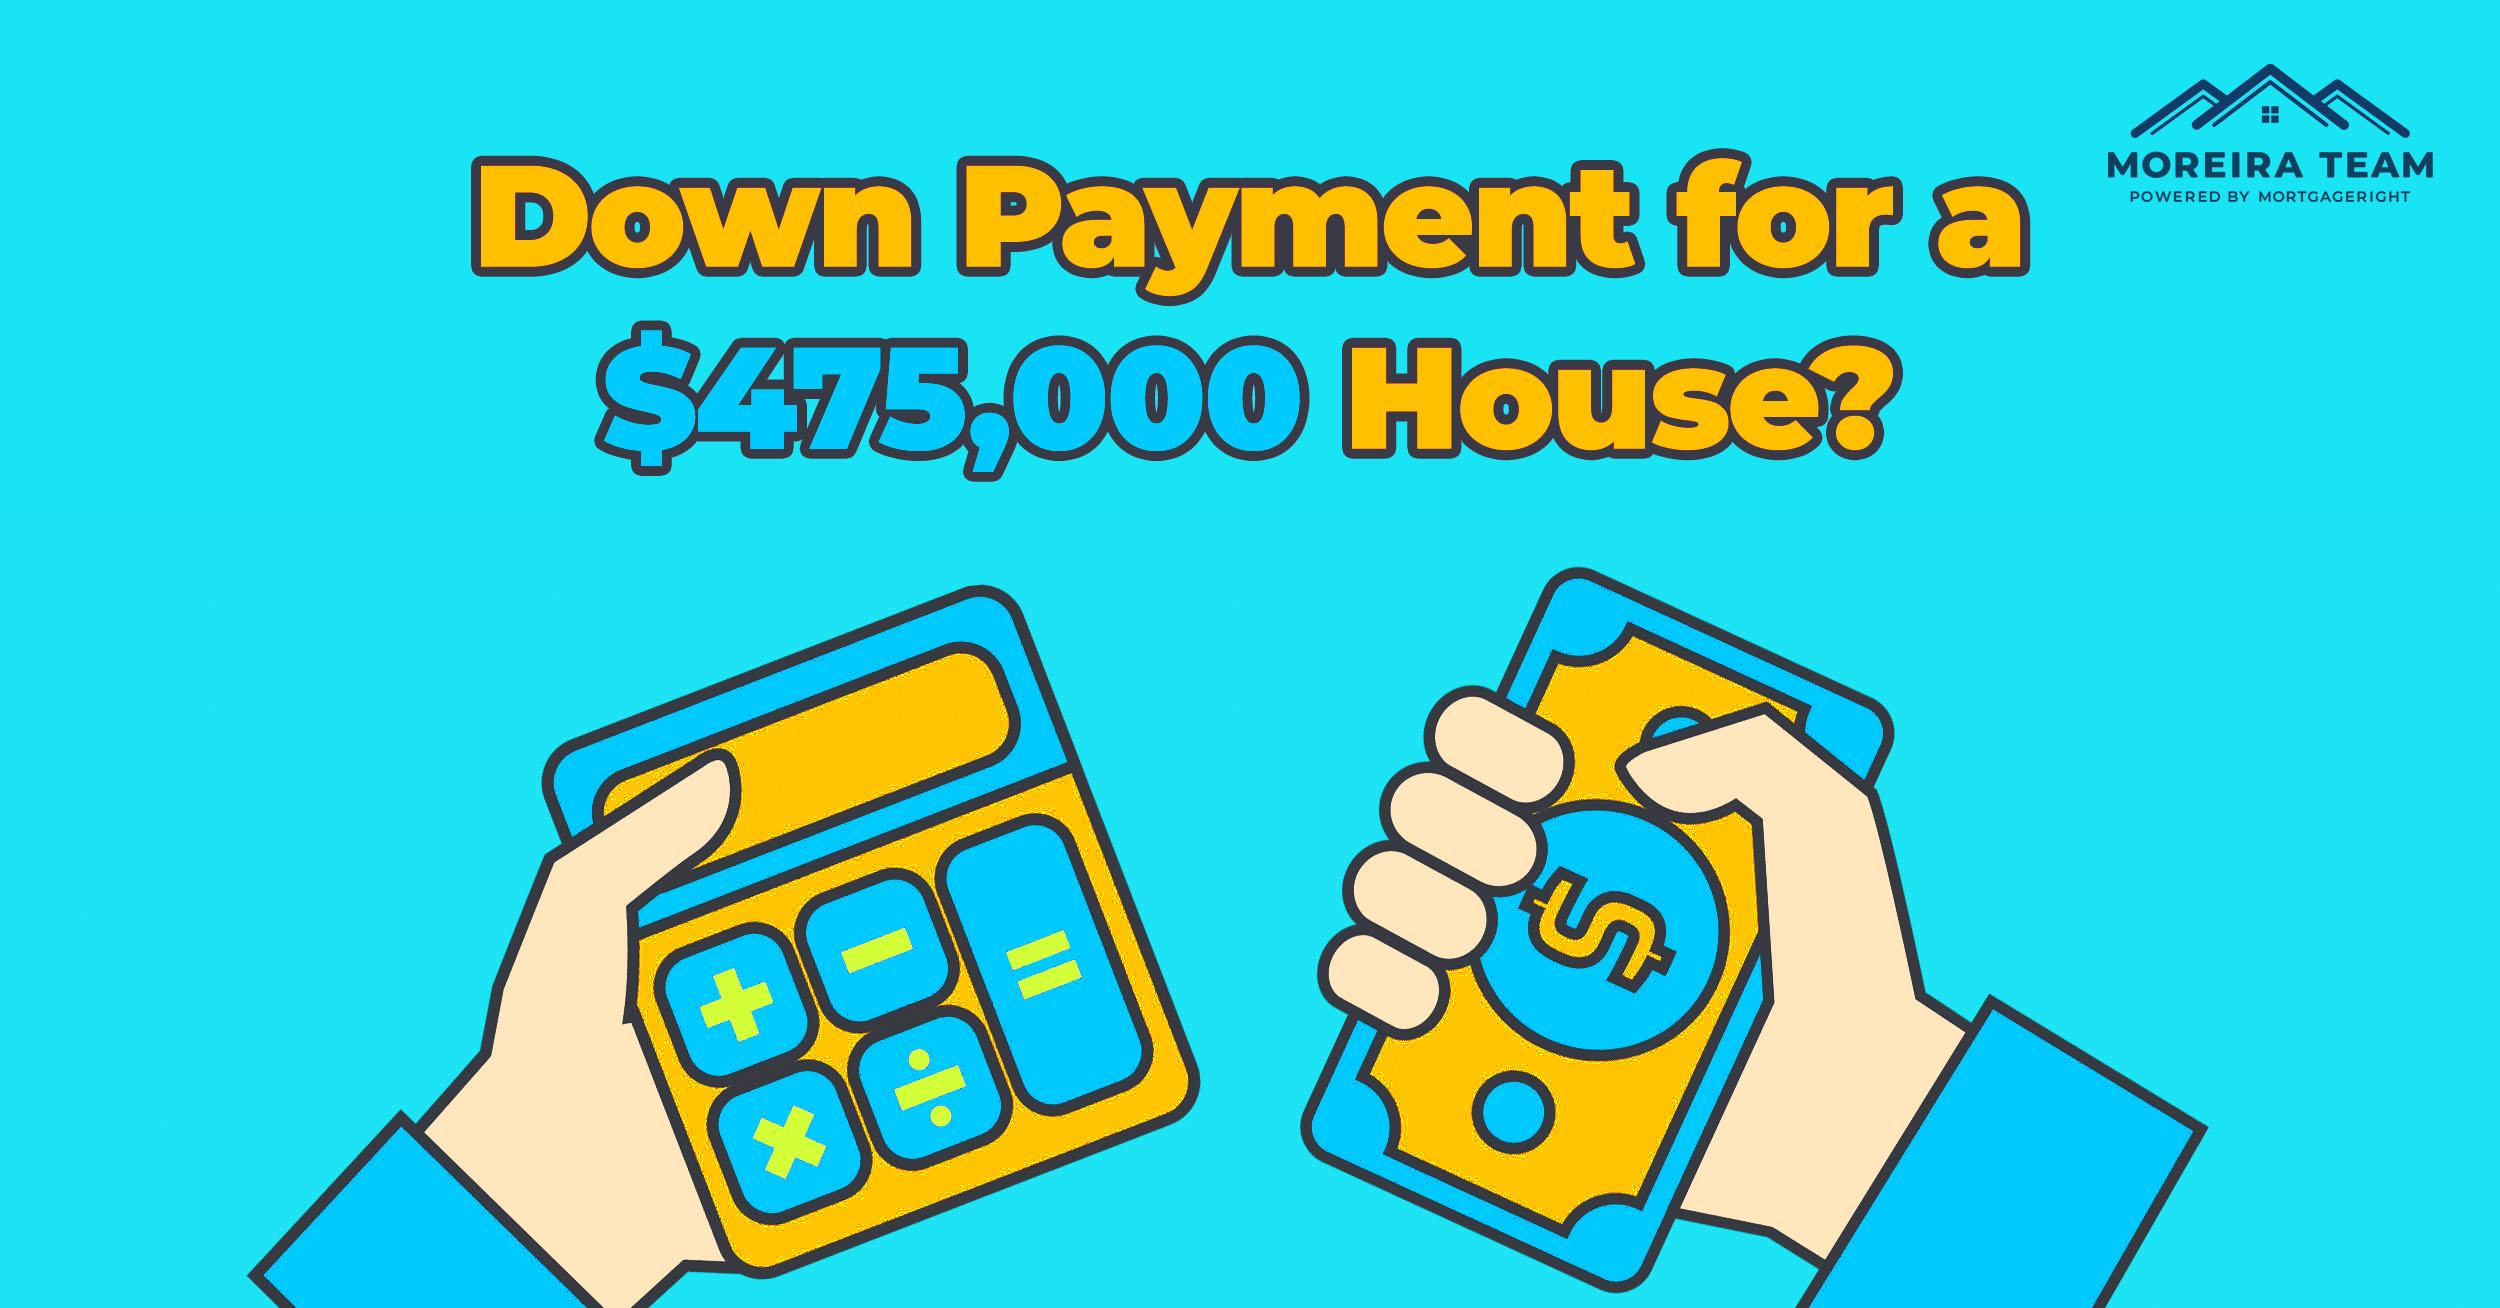 What’s the Down Payment on a $475,000 Home?